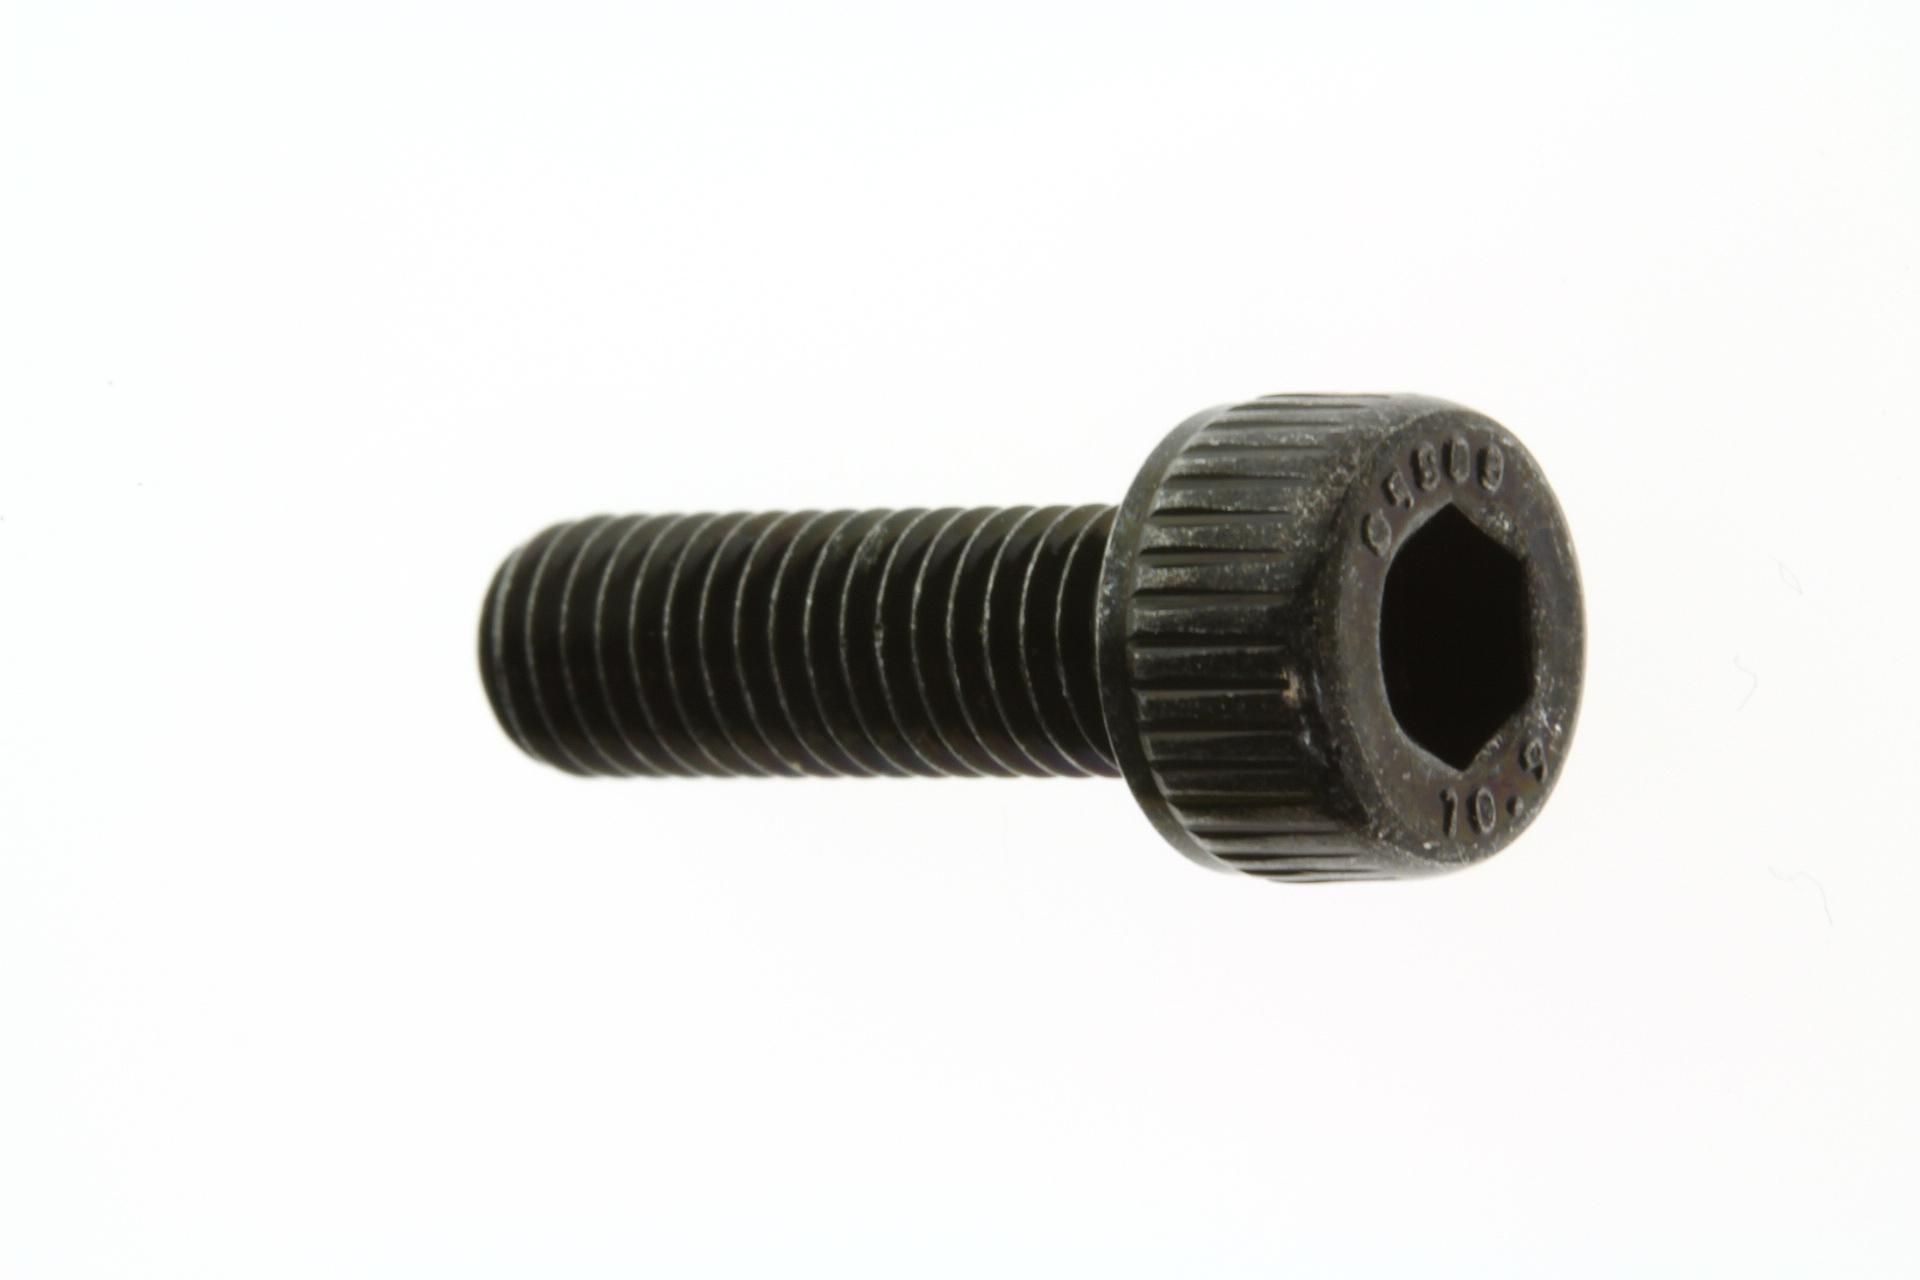 91312-05018-00 Superseded by 91317-05016-00 - BOLT, SOCKET